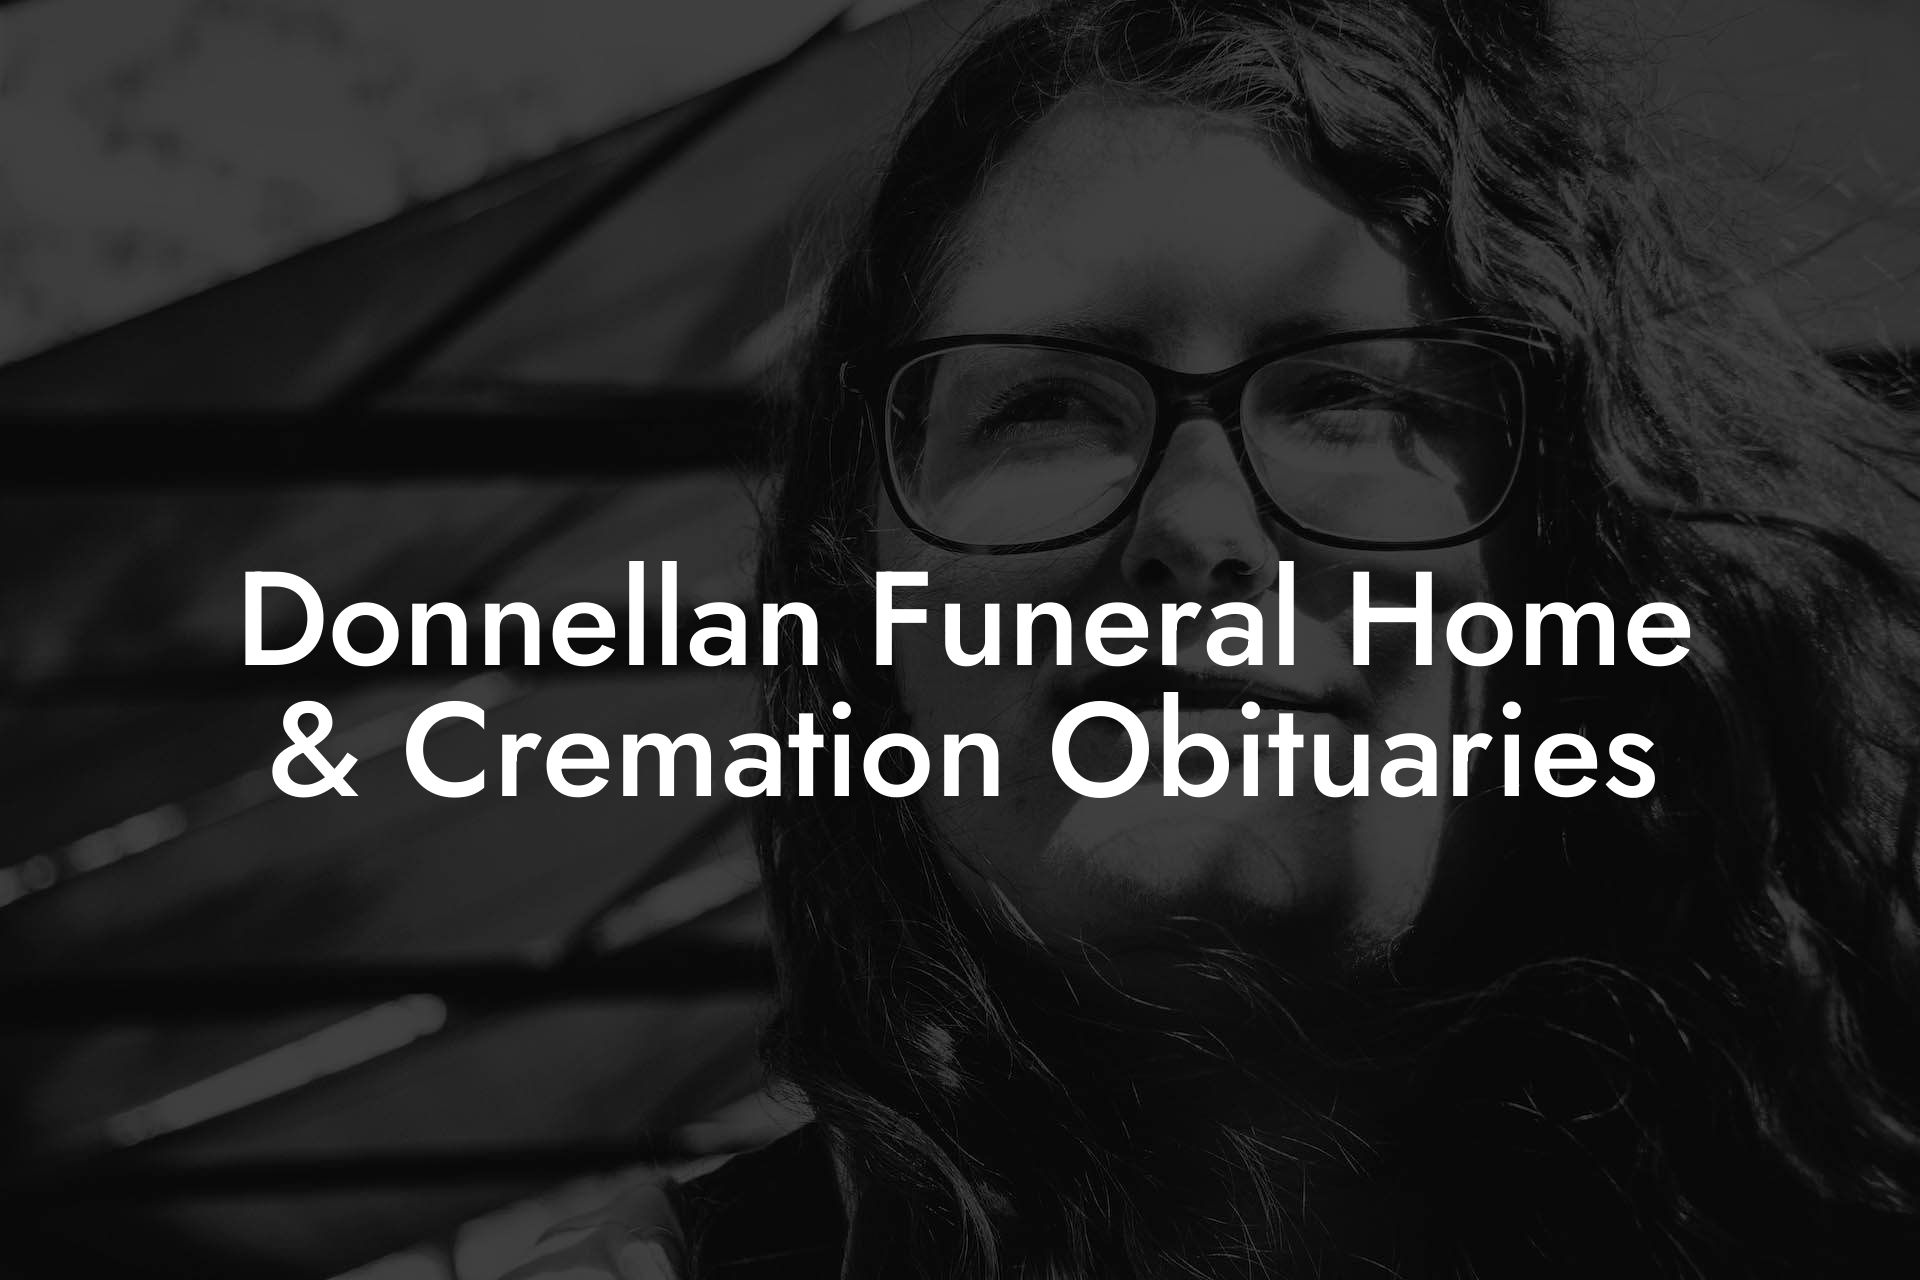 Donnellan Funeral Home & Cremation Obituaries